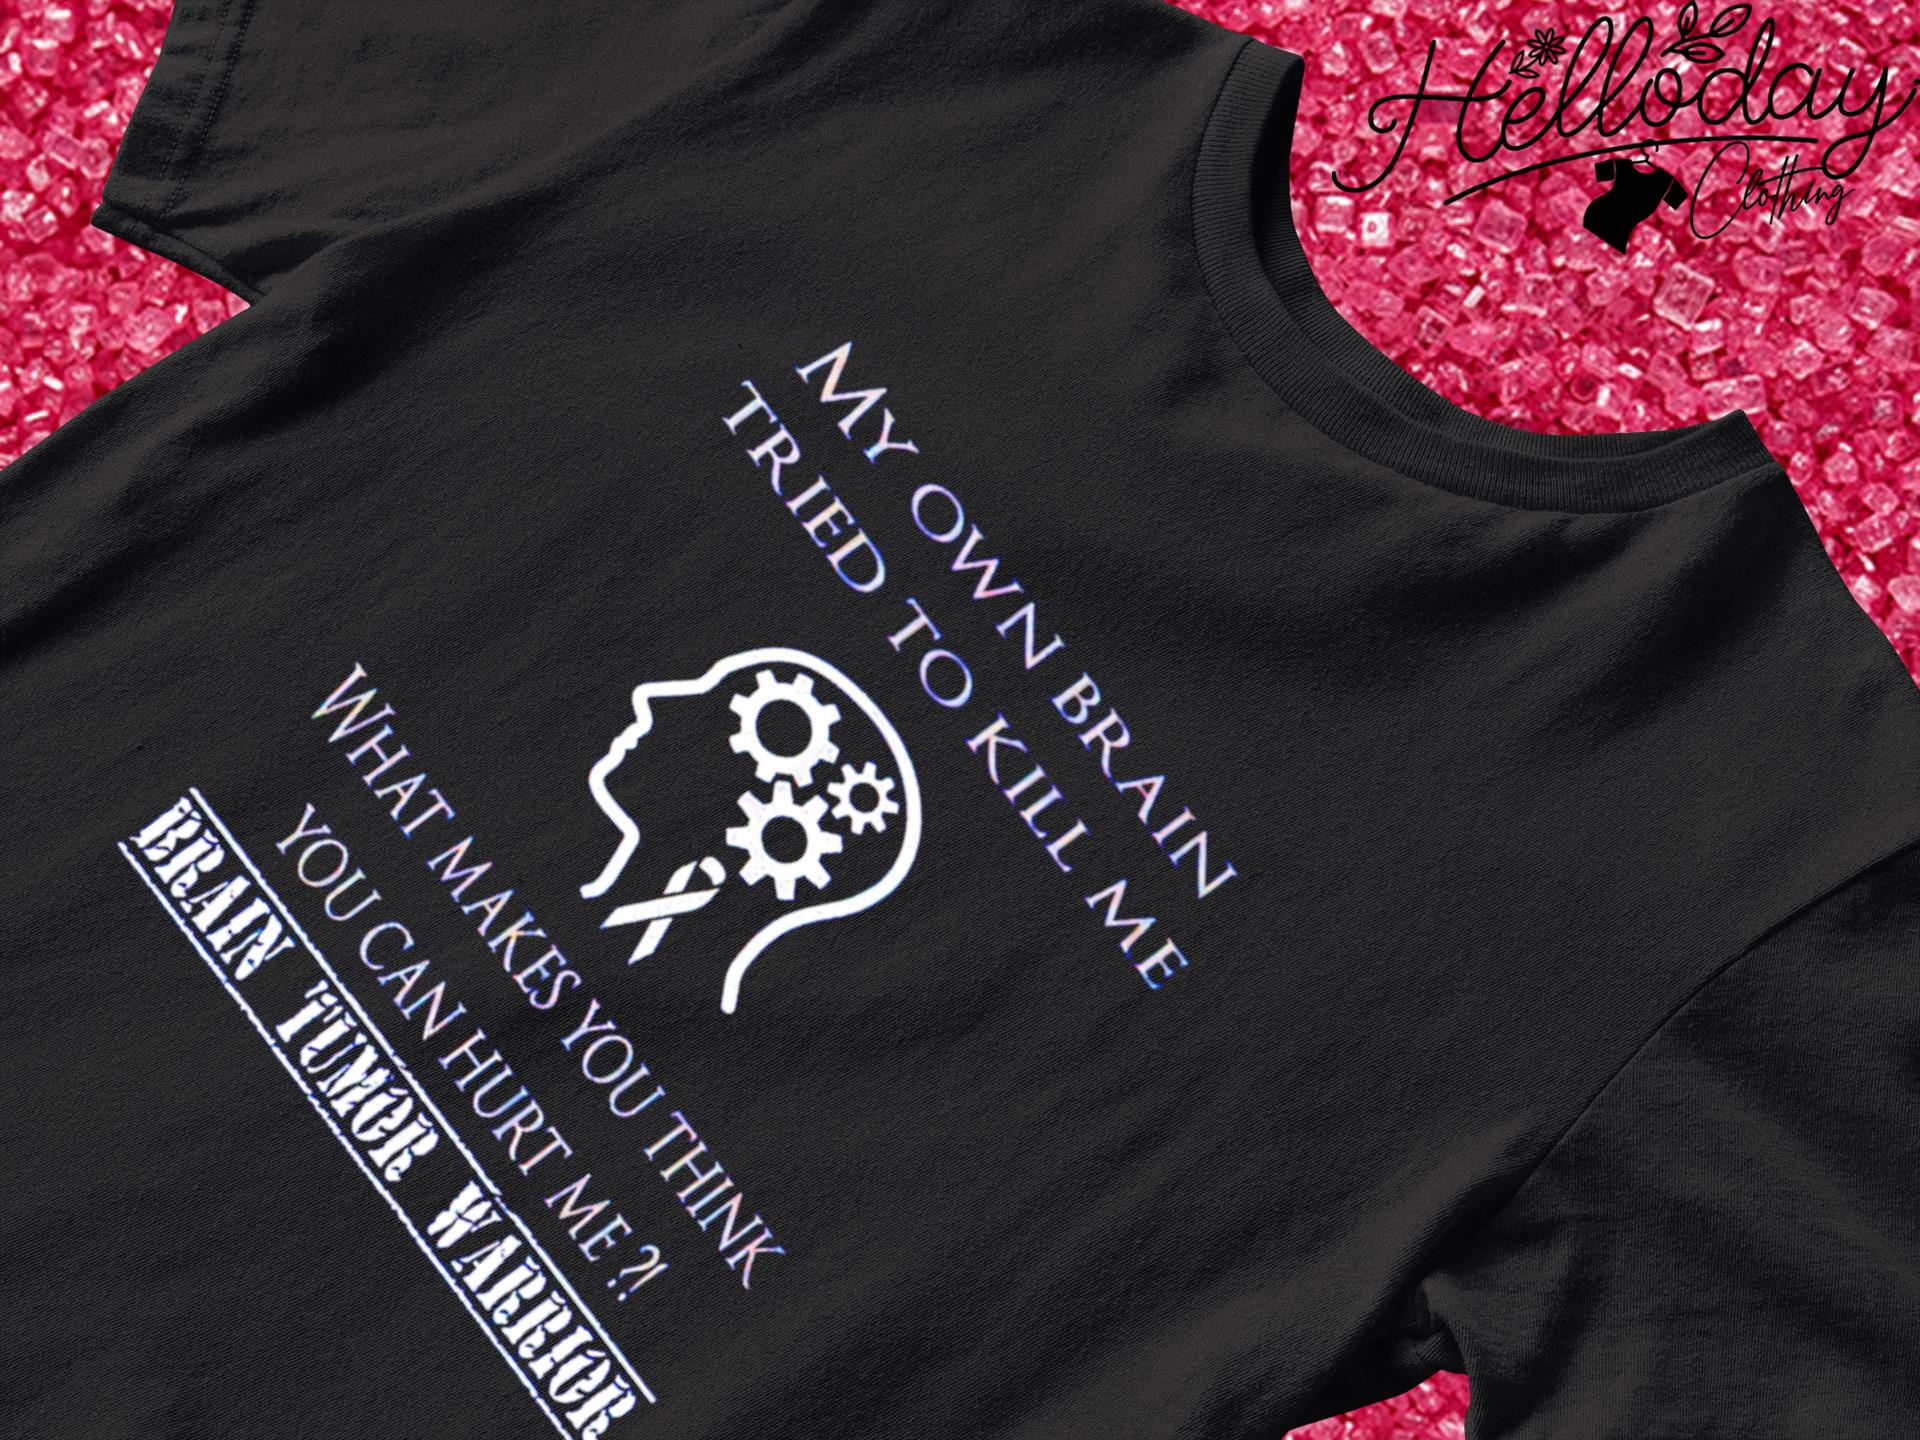 My own brain tried to kill me what makes you think you can hurt me Brain Tumor Warrior shirt